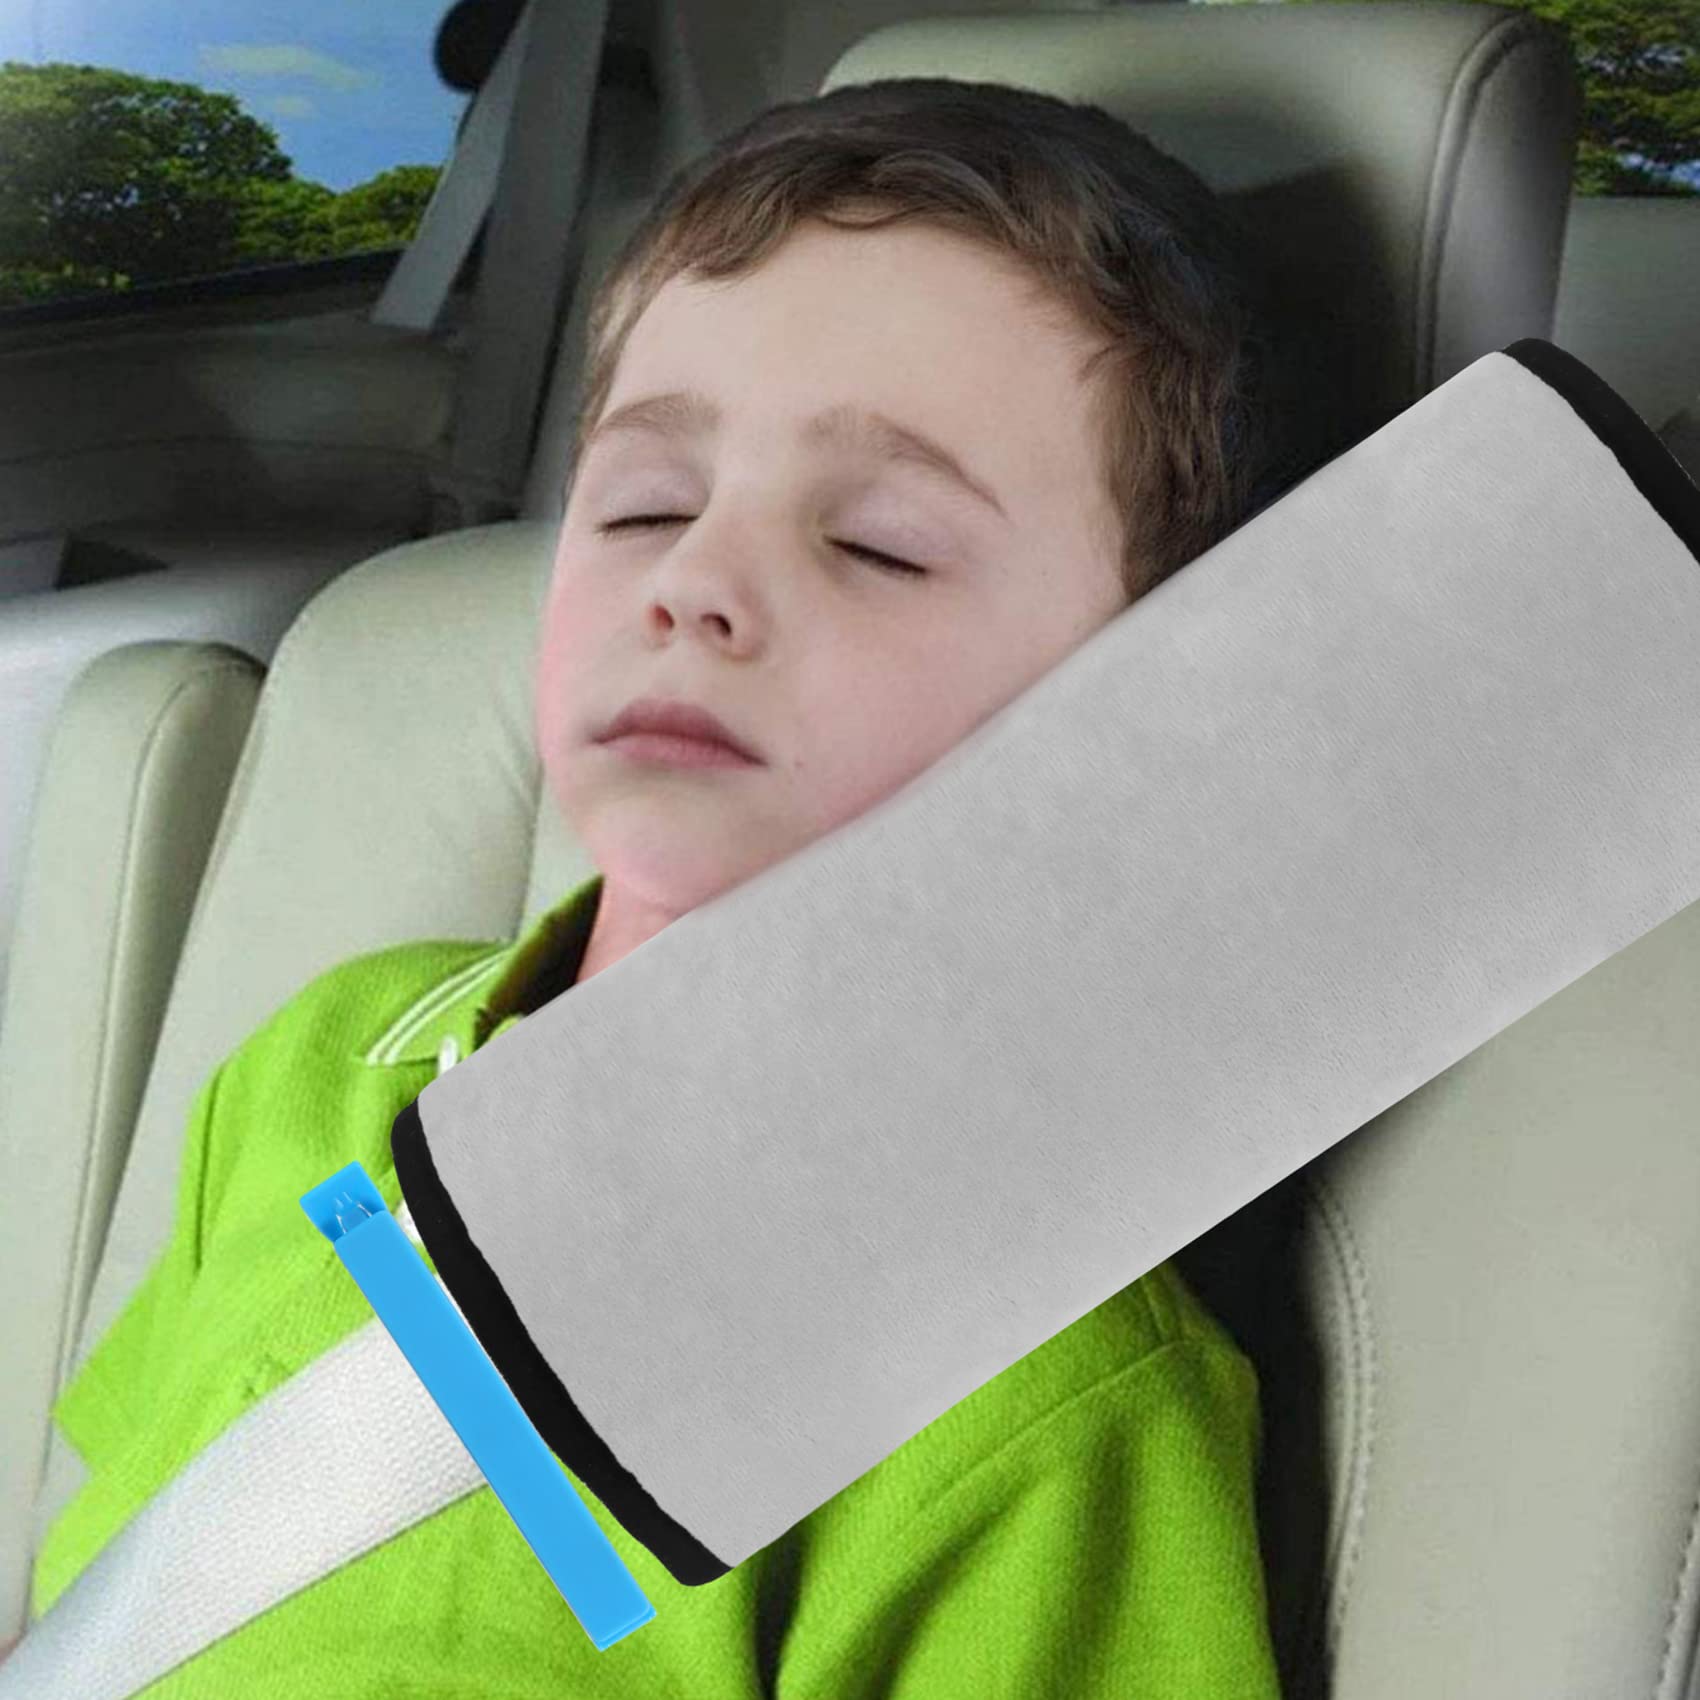 Seat Belt Pillow for Kids,Seat Belt Cushion,Toddler Seatbelt Pillow,Seatbelt Covers for Adults Children,Universal Travel Kids Car Pillow,Auto Car Seat Strap Shoulder Pads Protector Head Neck Support